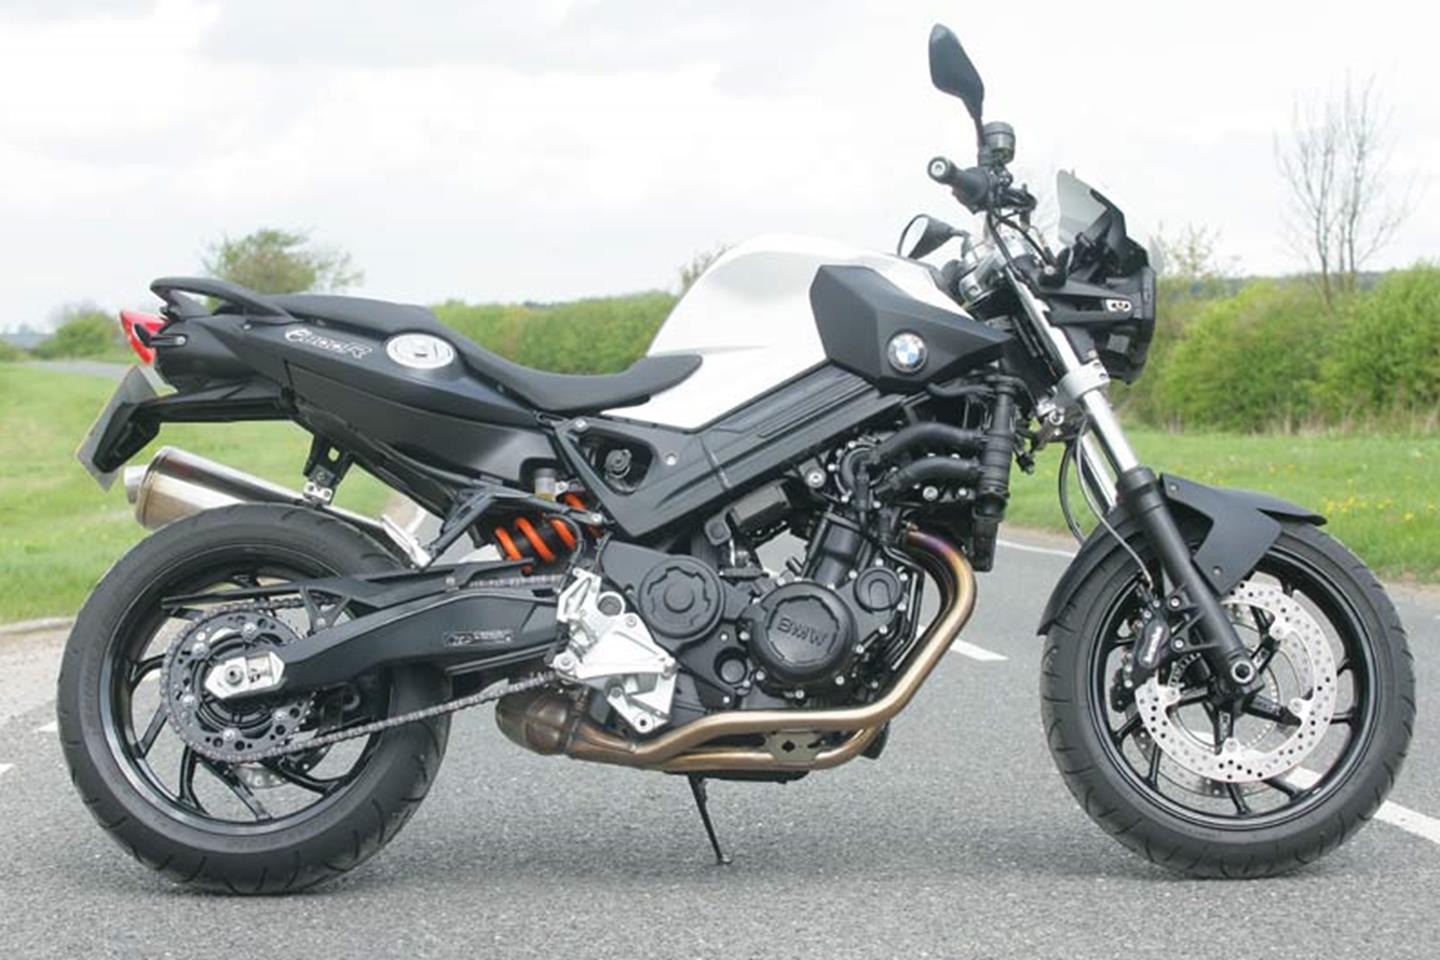 BMW F800R (2009-2019) Review | Owner & Expert Ratings